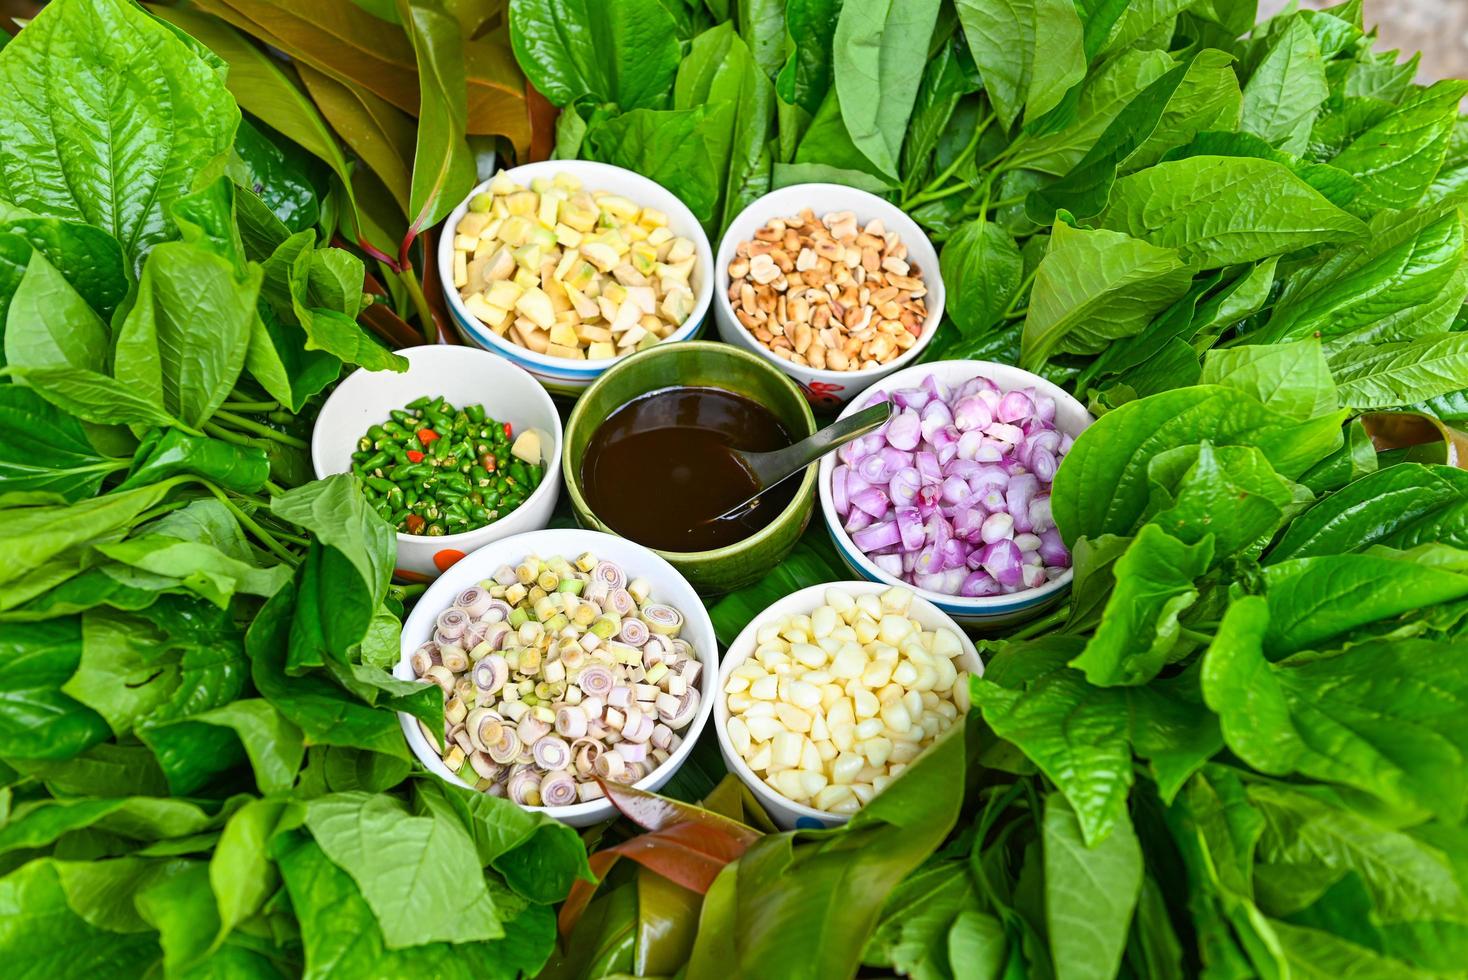 Miang Kham Or wild betel leaves wrap ingredients with lemon grass, garlic, shallot, lime, chilli, roasted peanuts with sweet dipping sauce, Asian appetizer food. photo